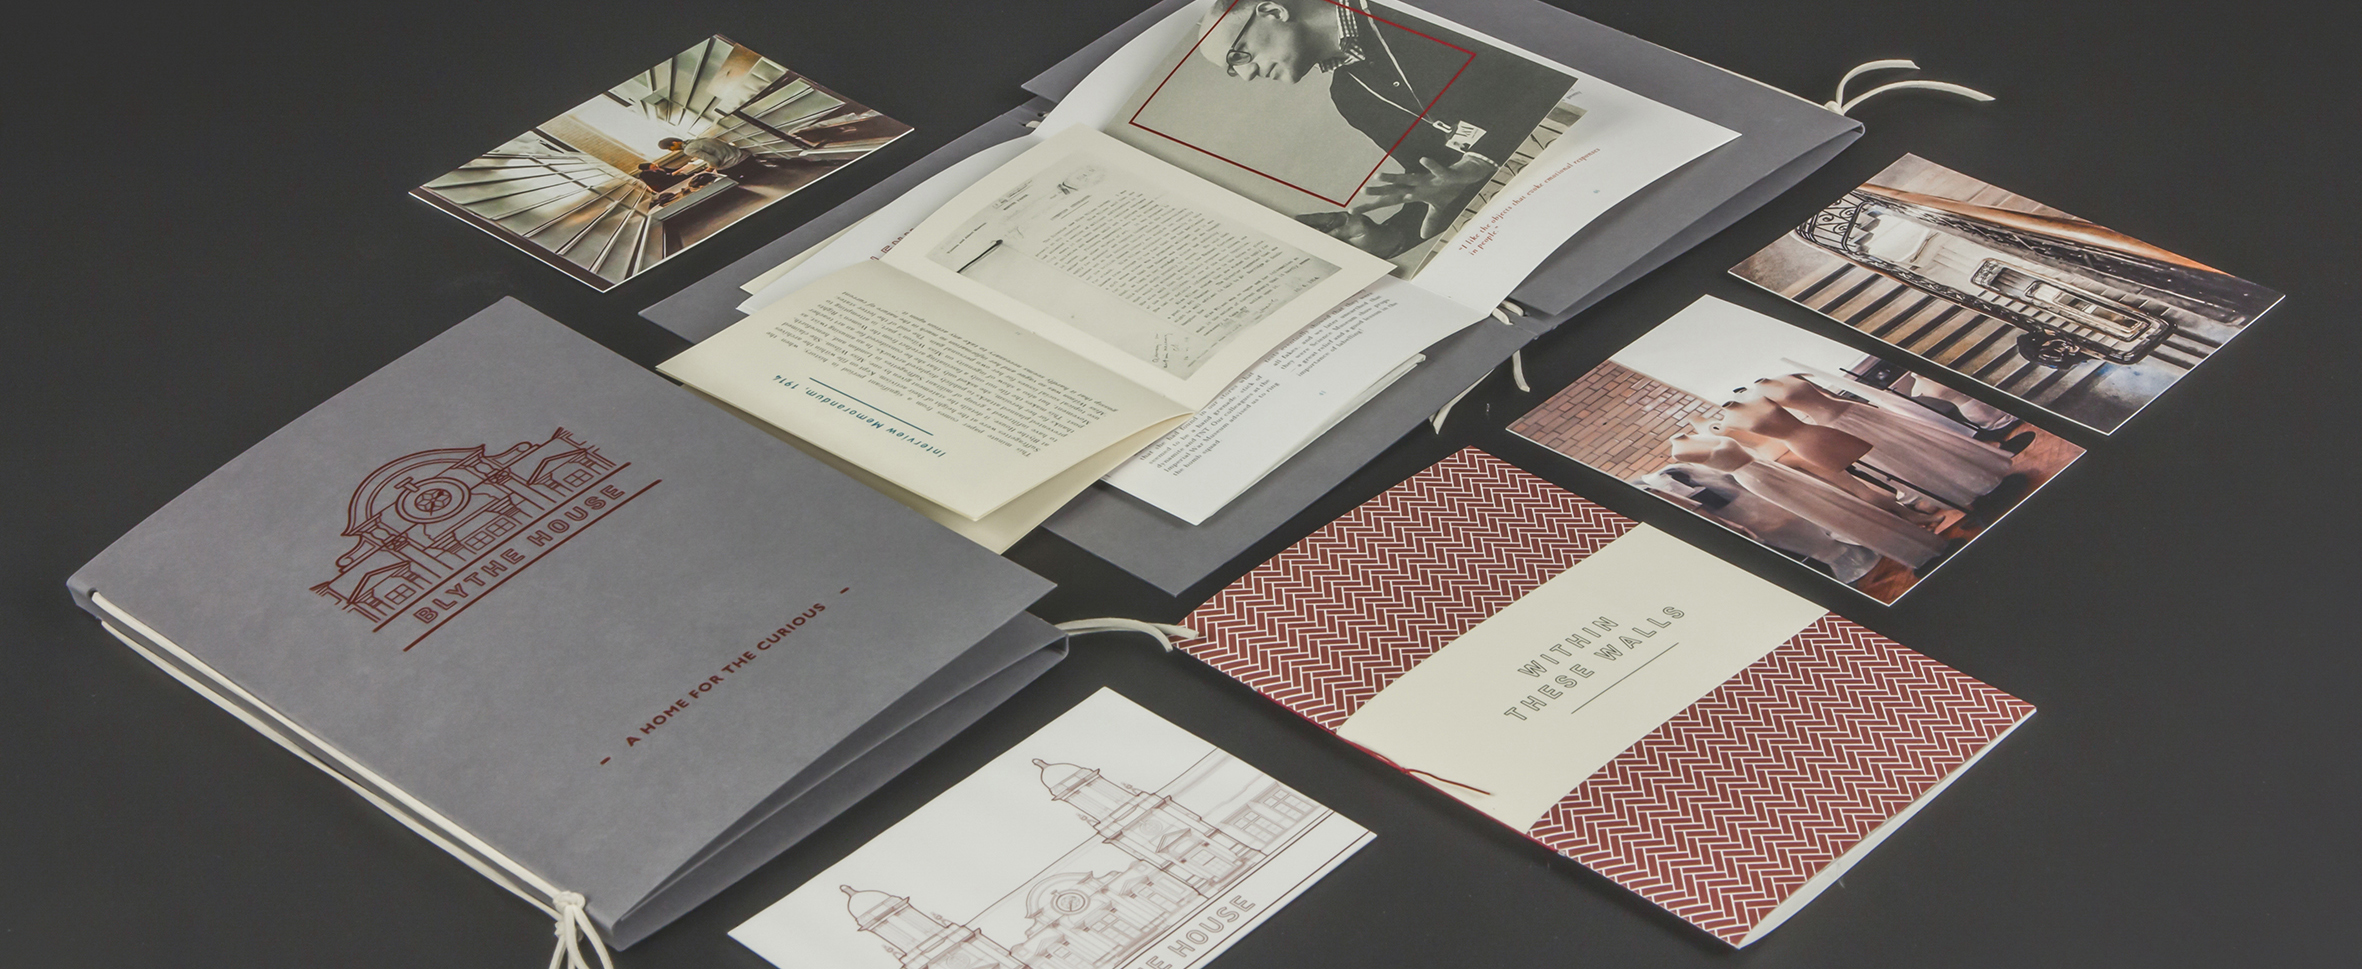 A series of publications laid out on a black table